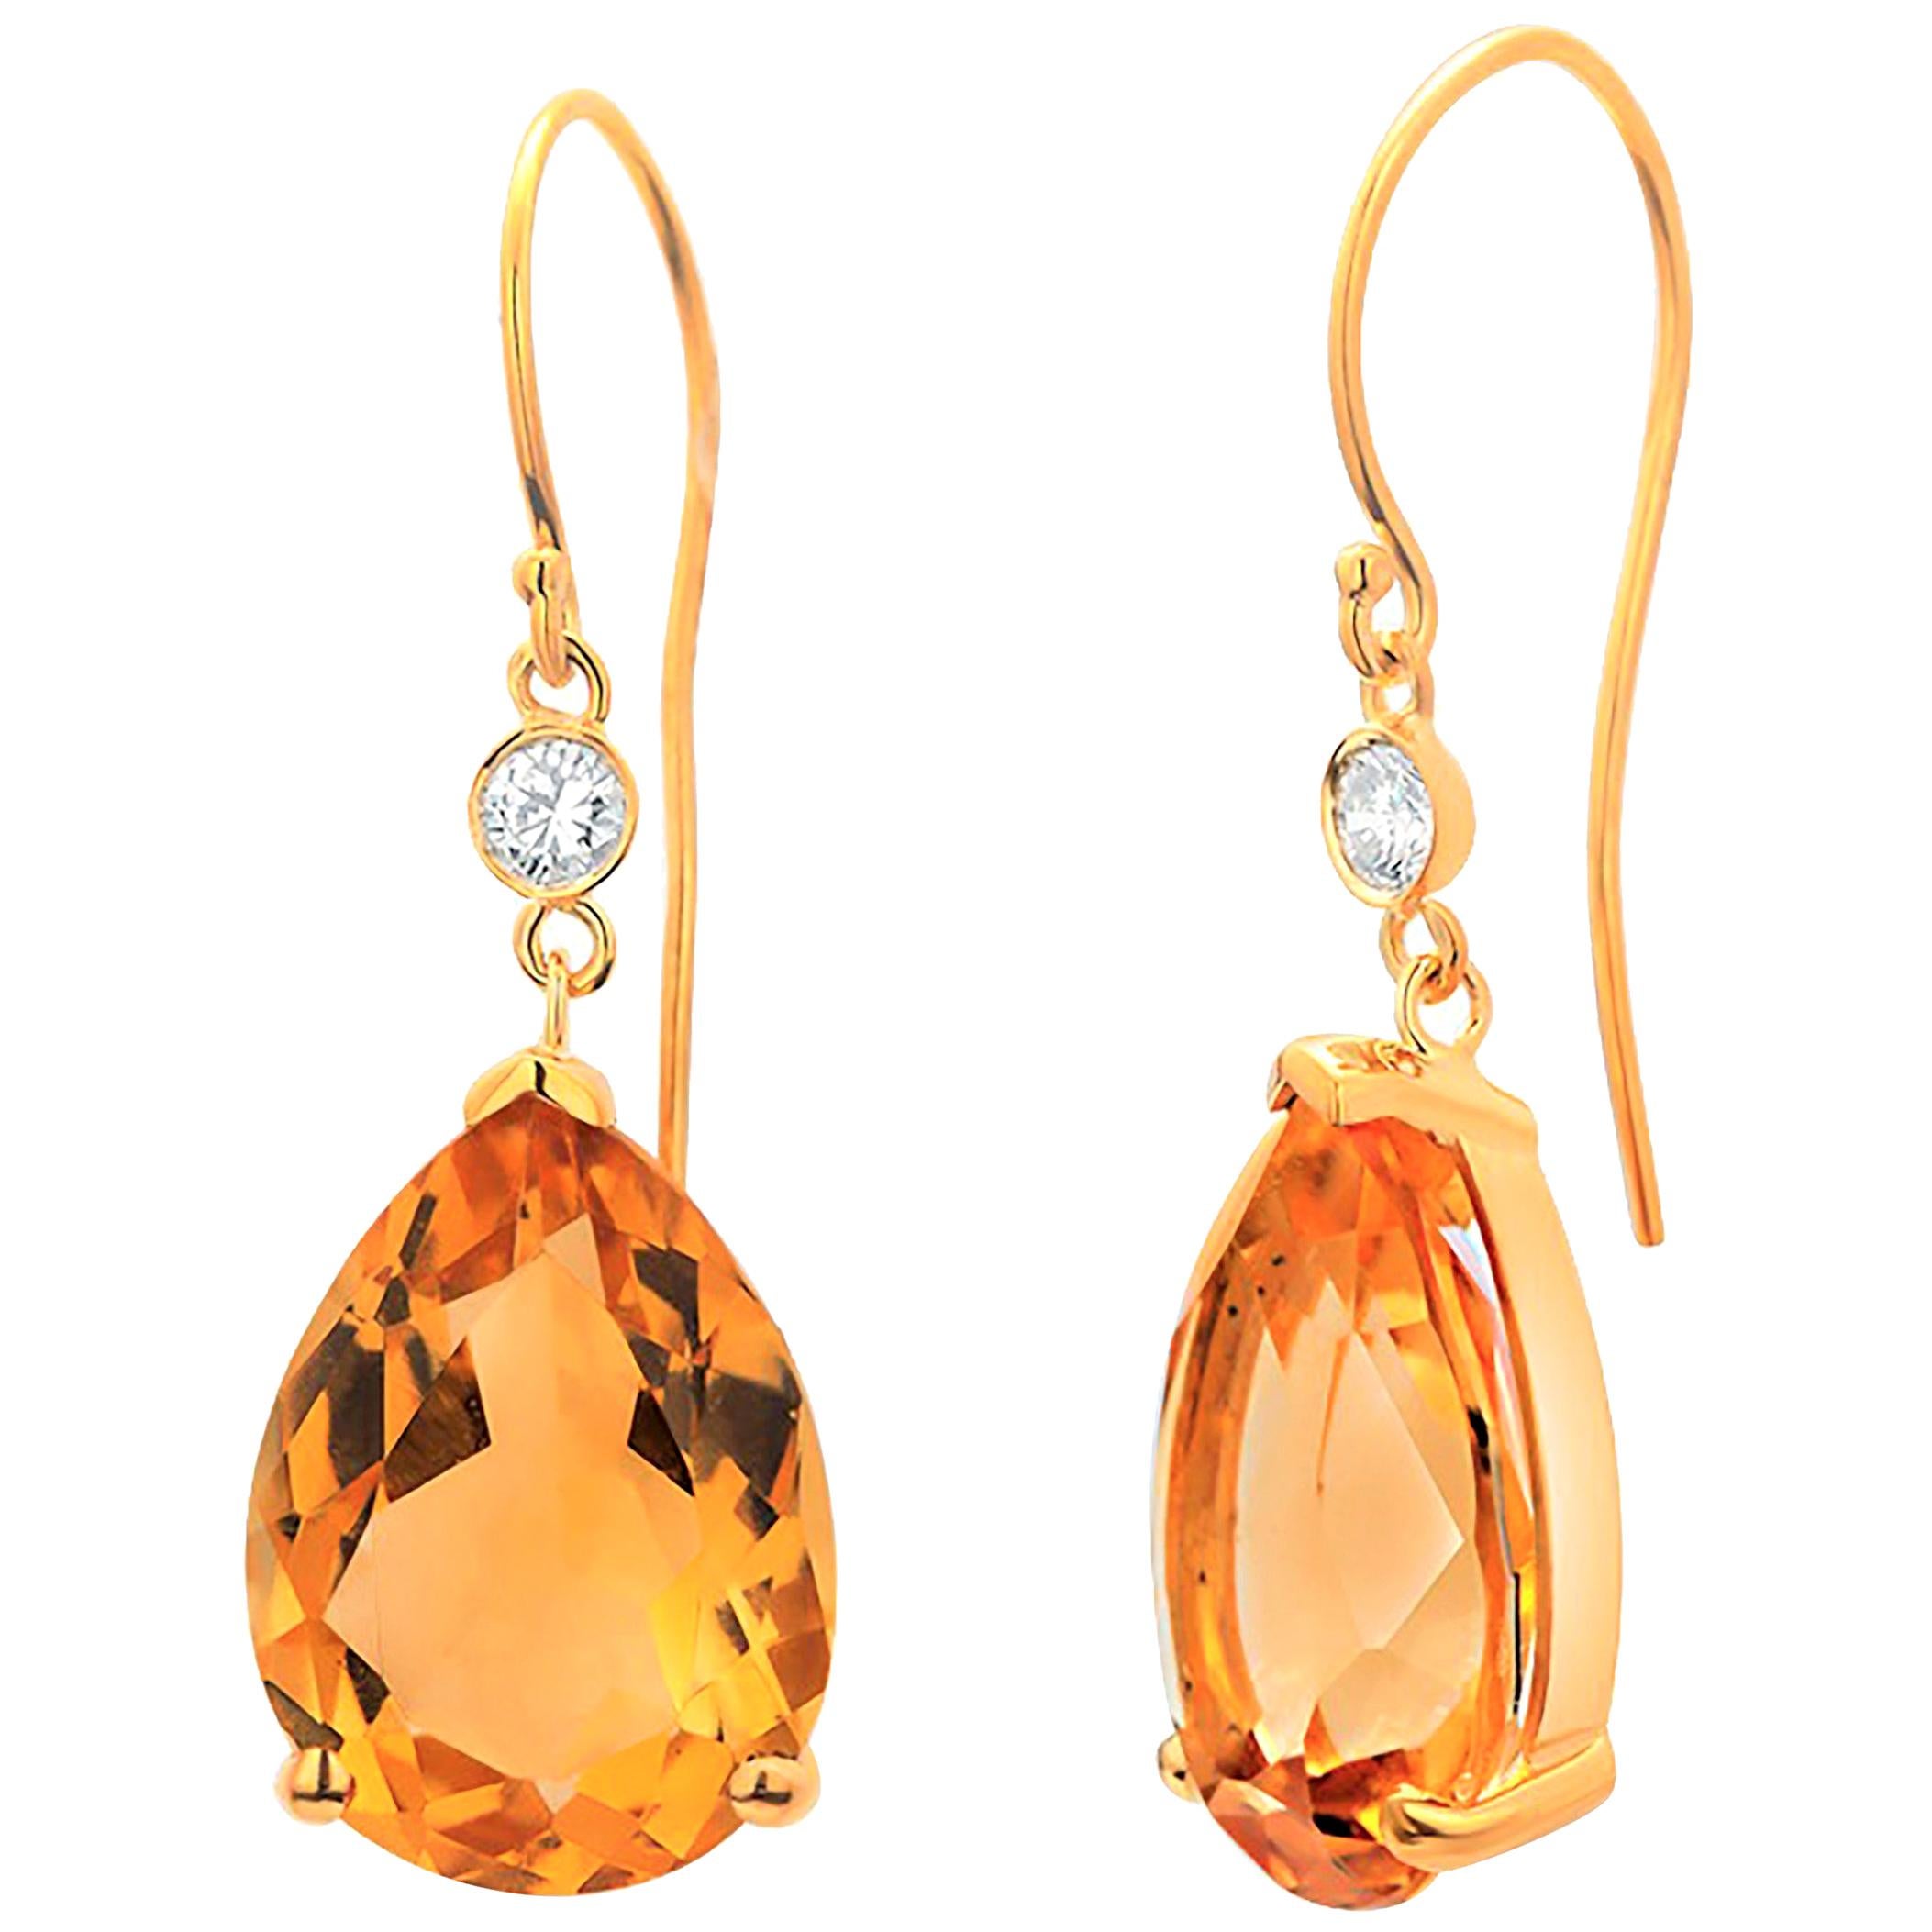 Pear Yellow Citrine and Diamond Gold Wire Hoop Earrings Weighing 17.35 Carat